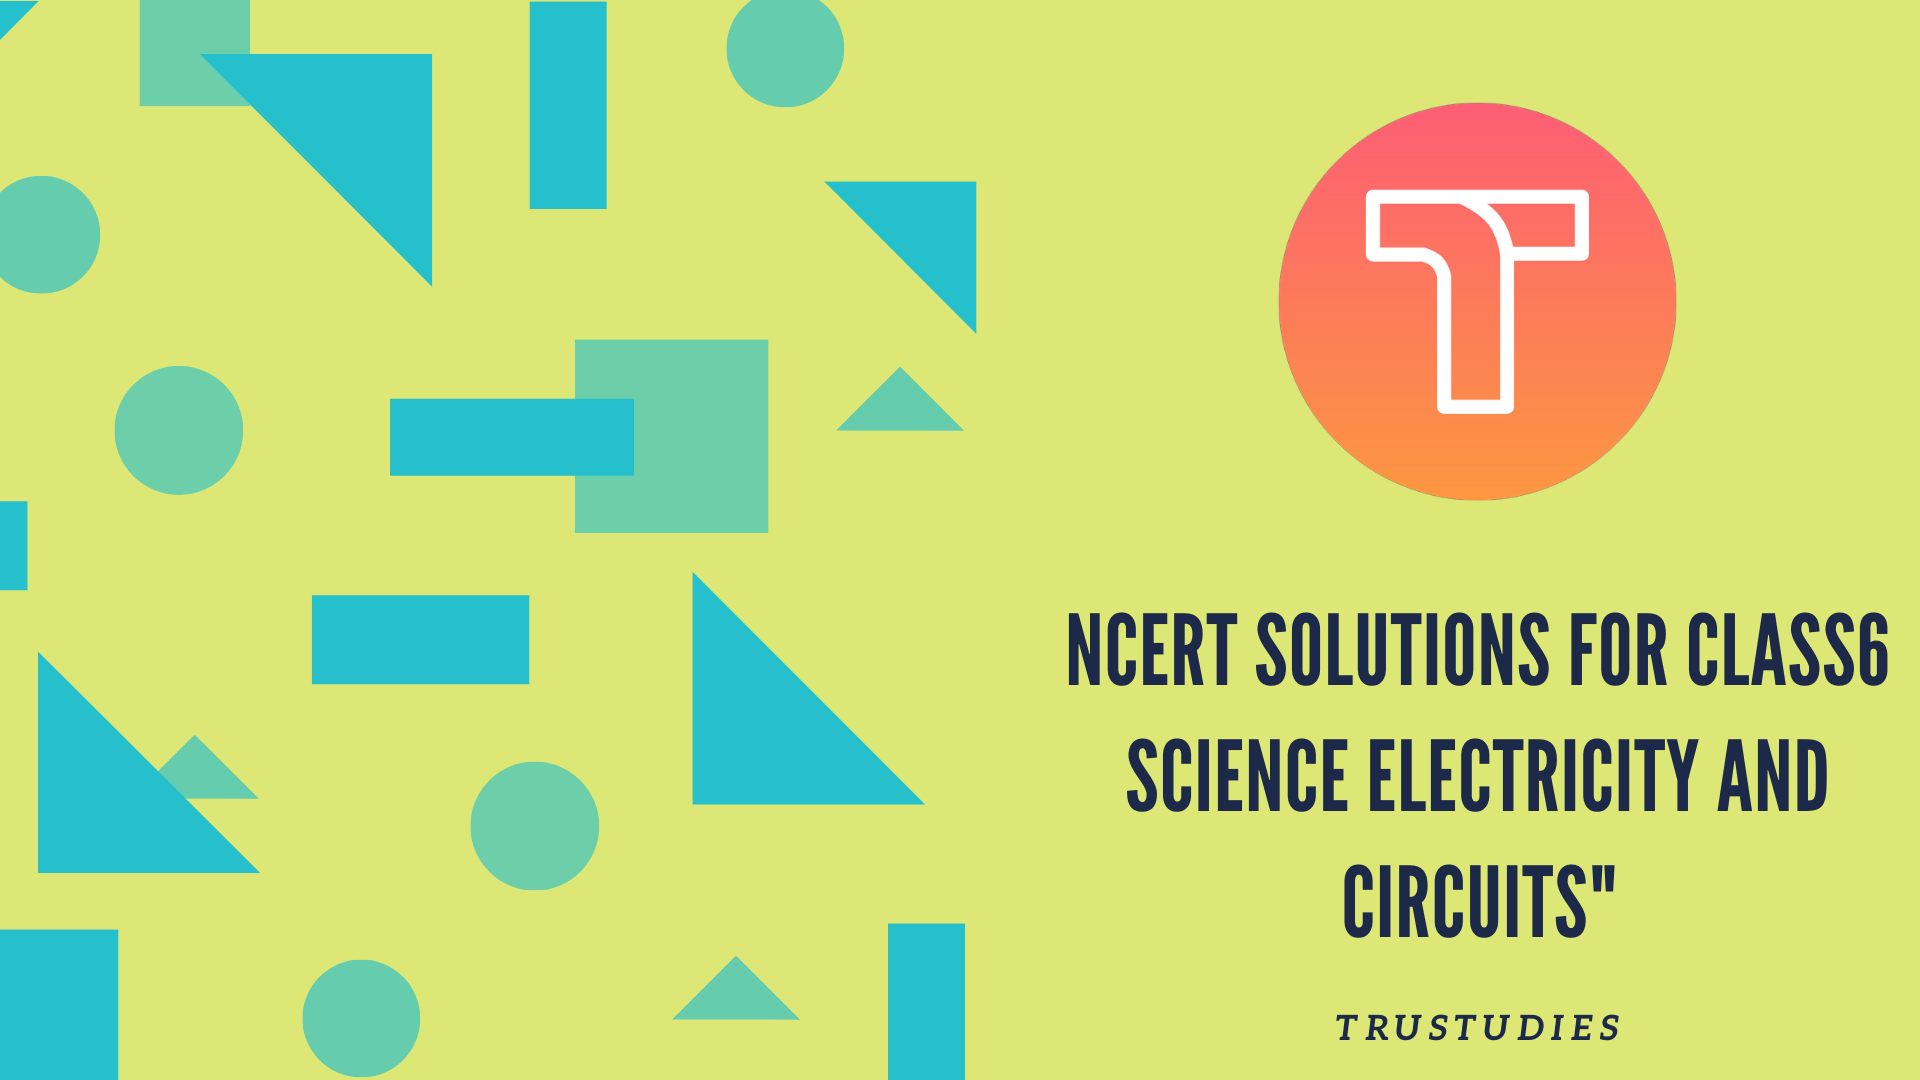 NCERT solutions for class 6 science chapter 12 electricity and circuits banner image